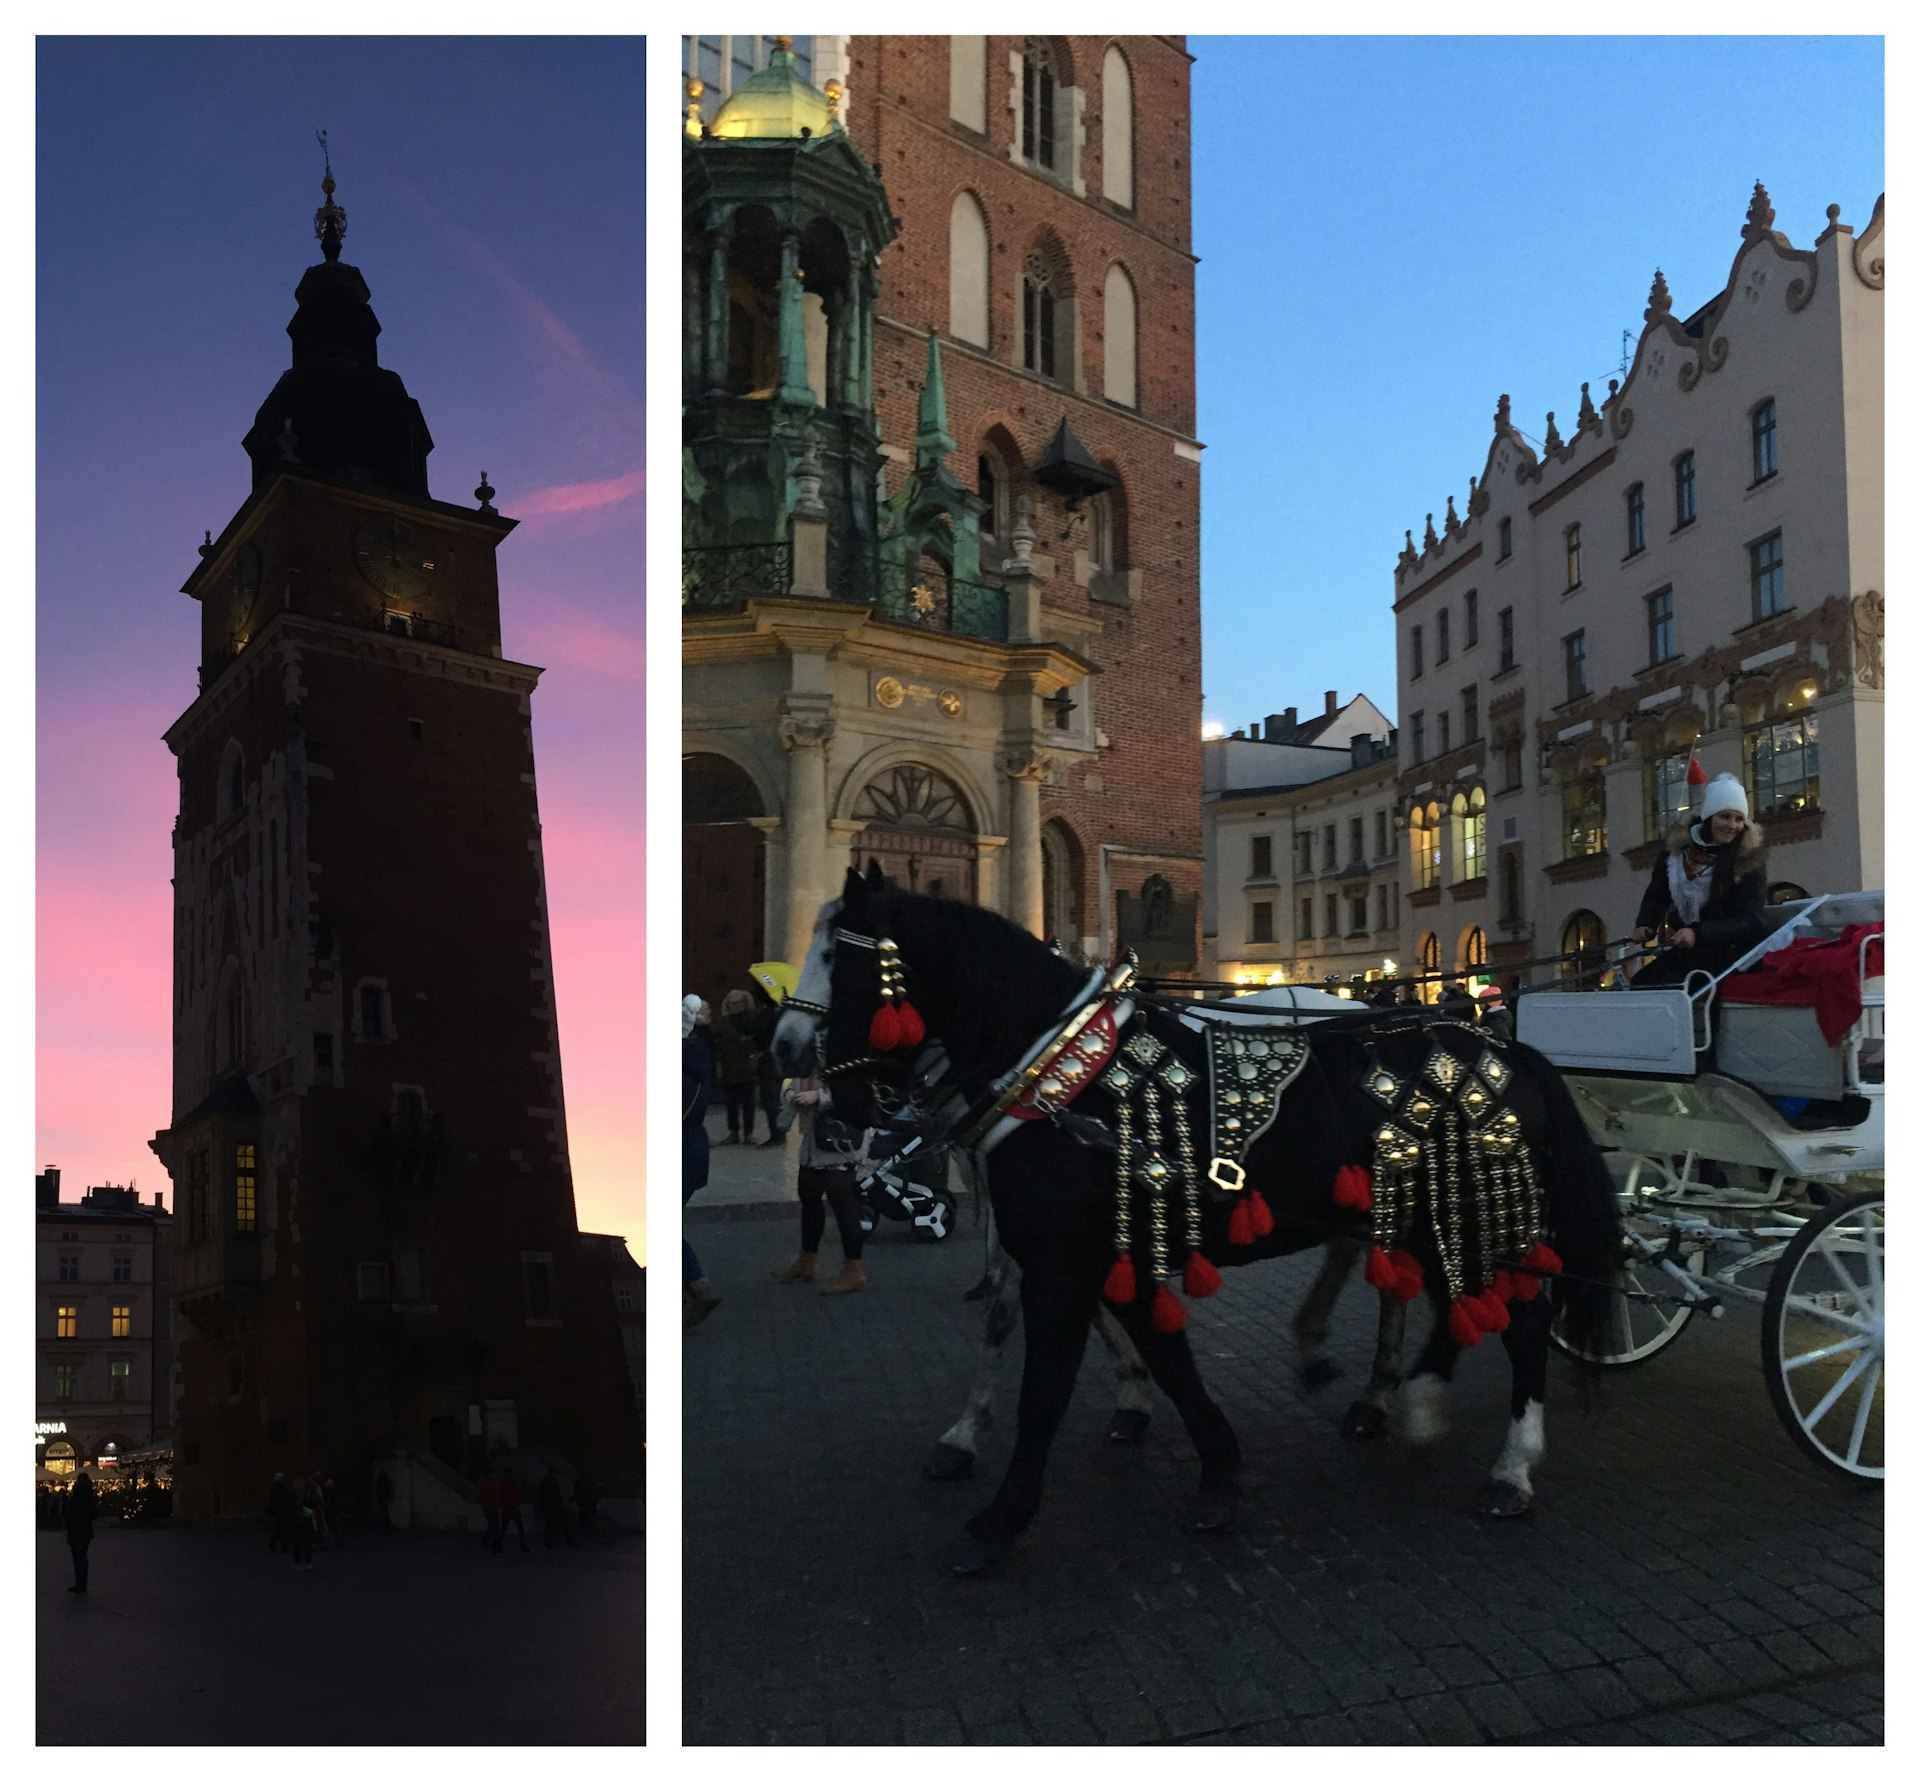 On the left, a luminous pink sky behind a tower. On the right, a horse-drawn carriage.